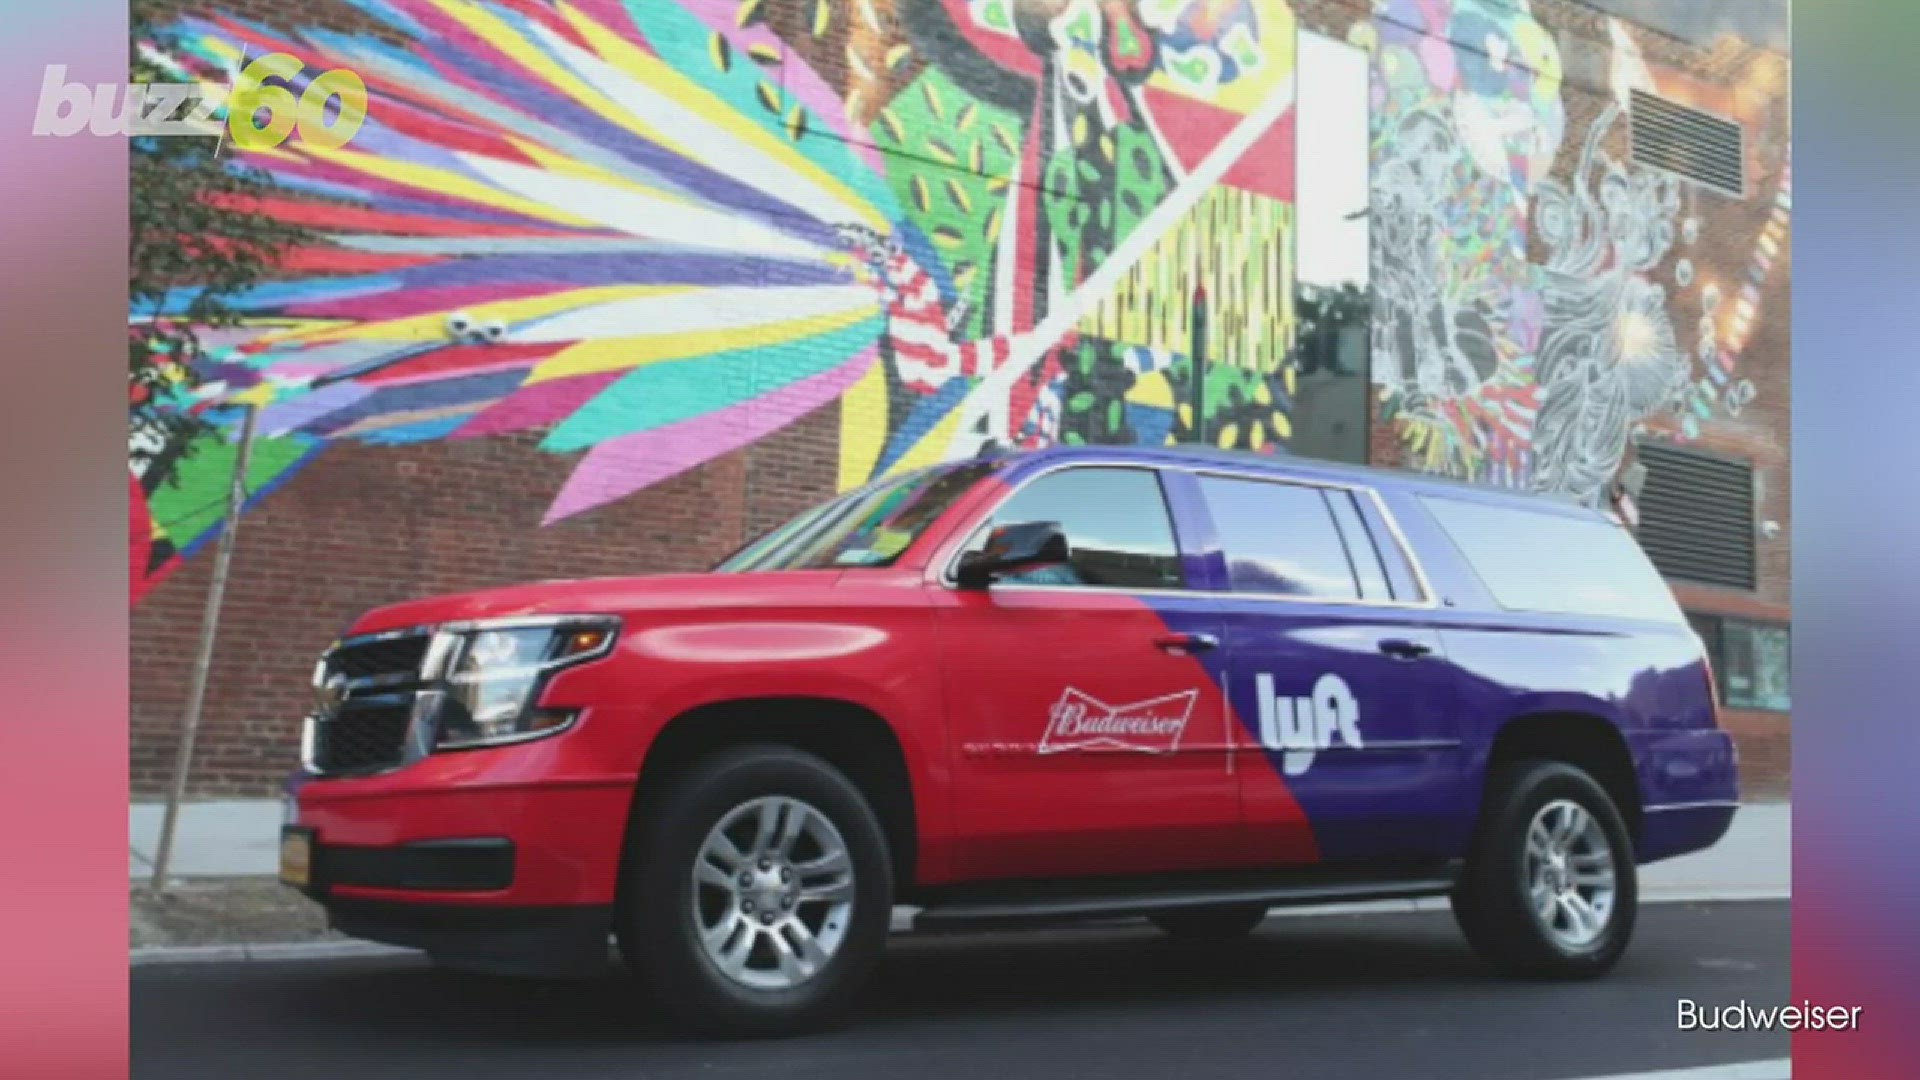 Budweiser has teamed up with Lyft to give out up to 150,000 free rides. TC Newman (@PurpleTCNewman) has more on how these businesses are trying to eliminate drunk driving.